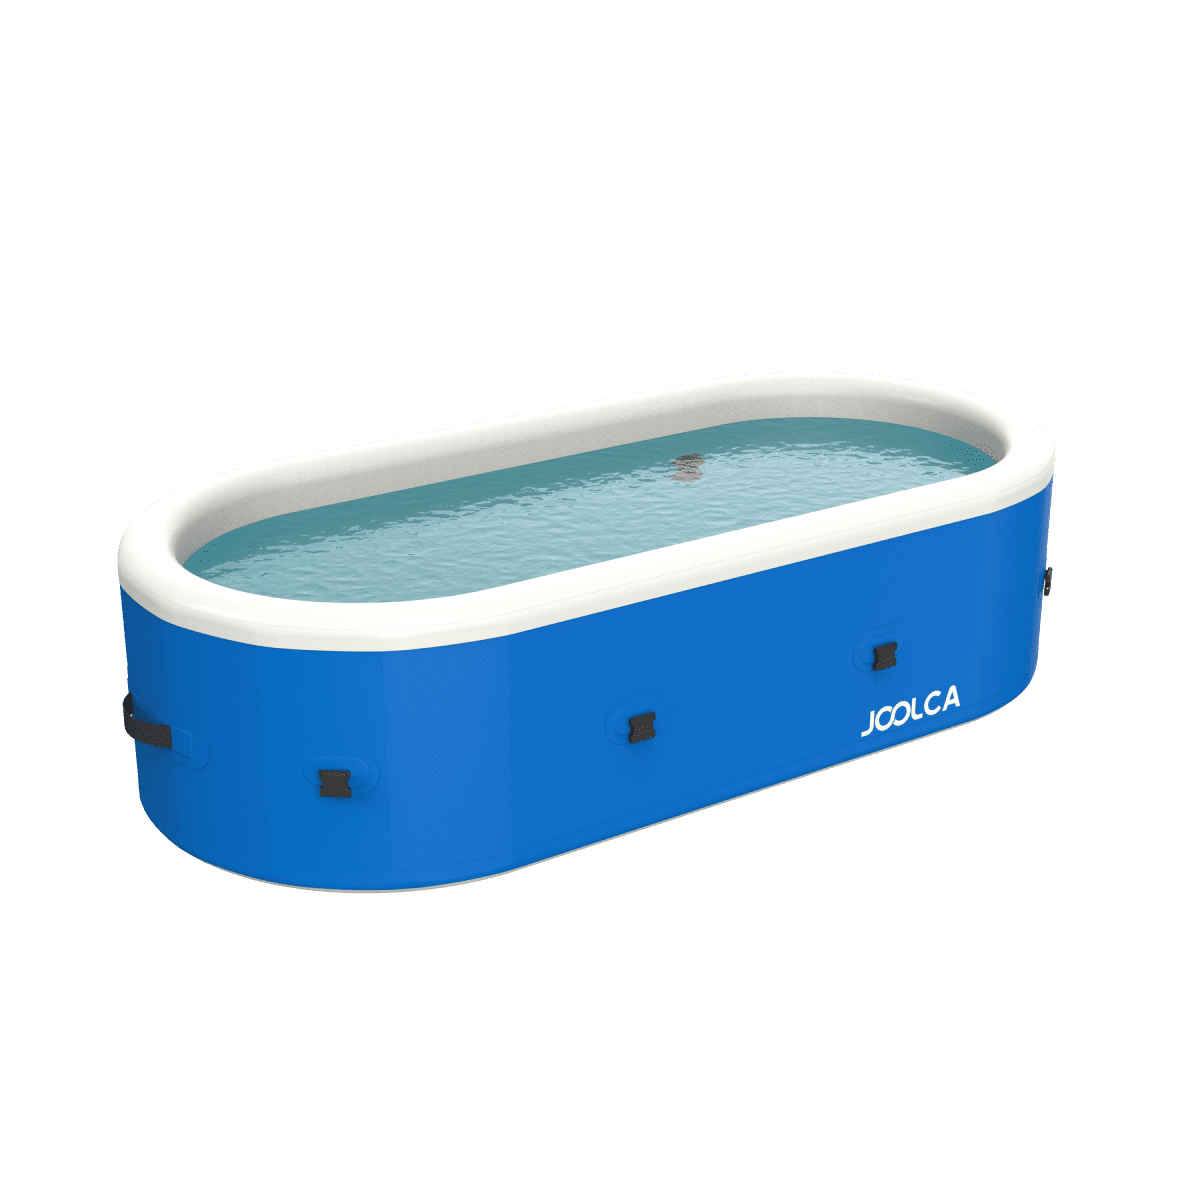 A large inflatable Hot tub with Joolca branding 